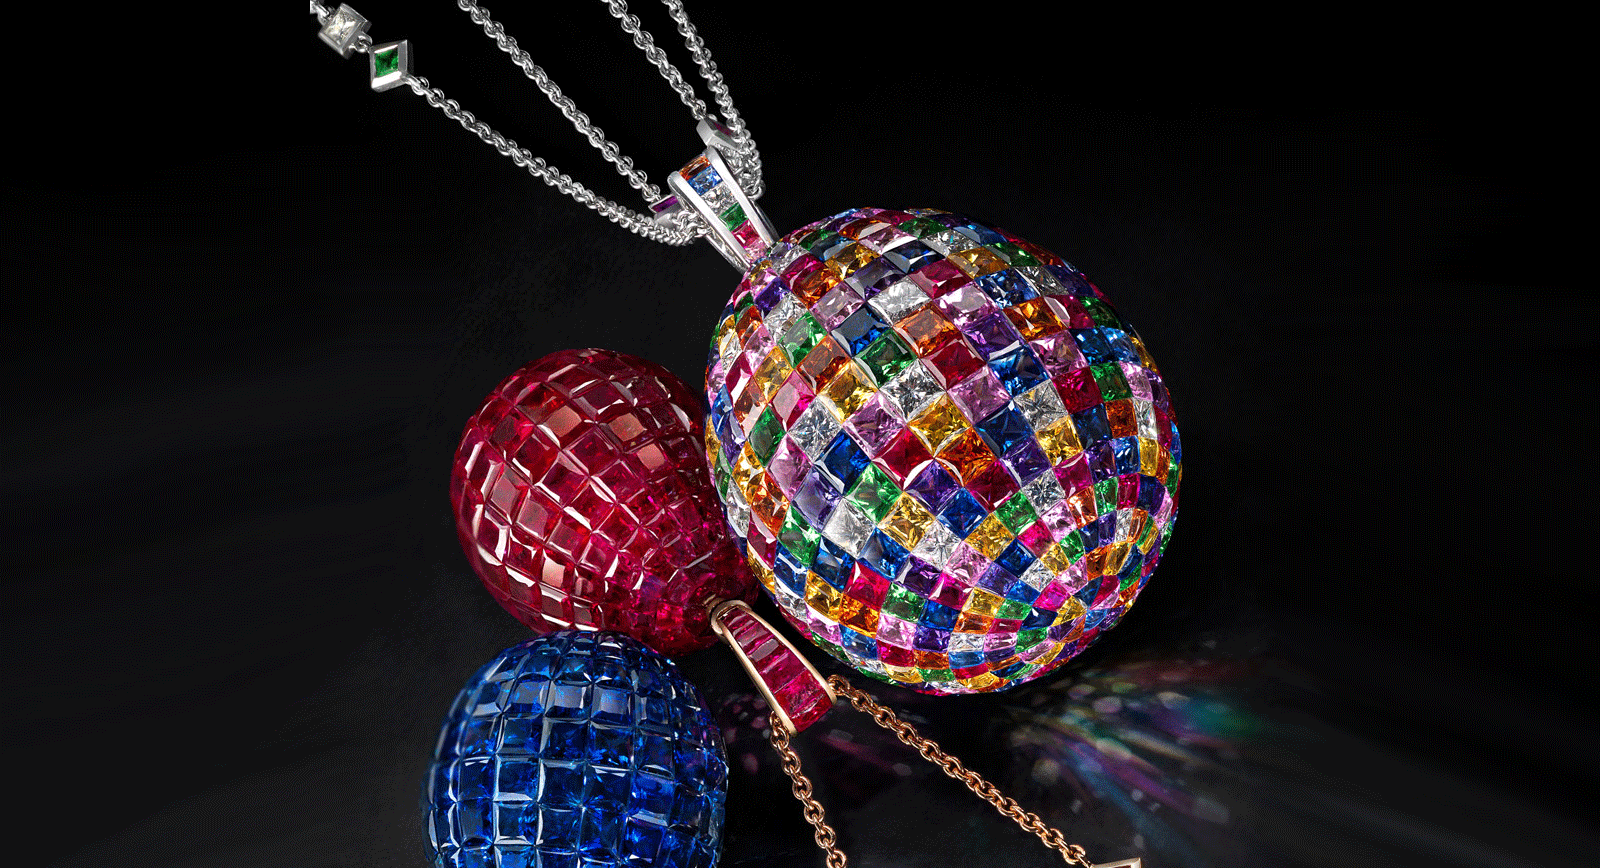 Faberge’s glittering new pieces, on display at Baselworld 2016